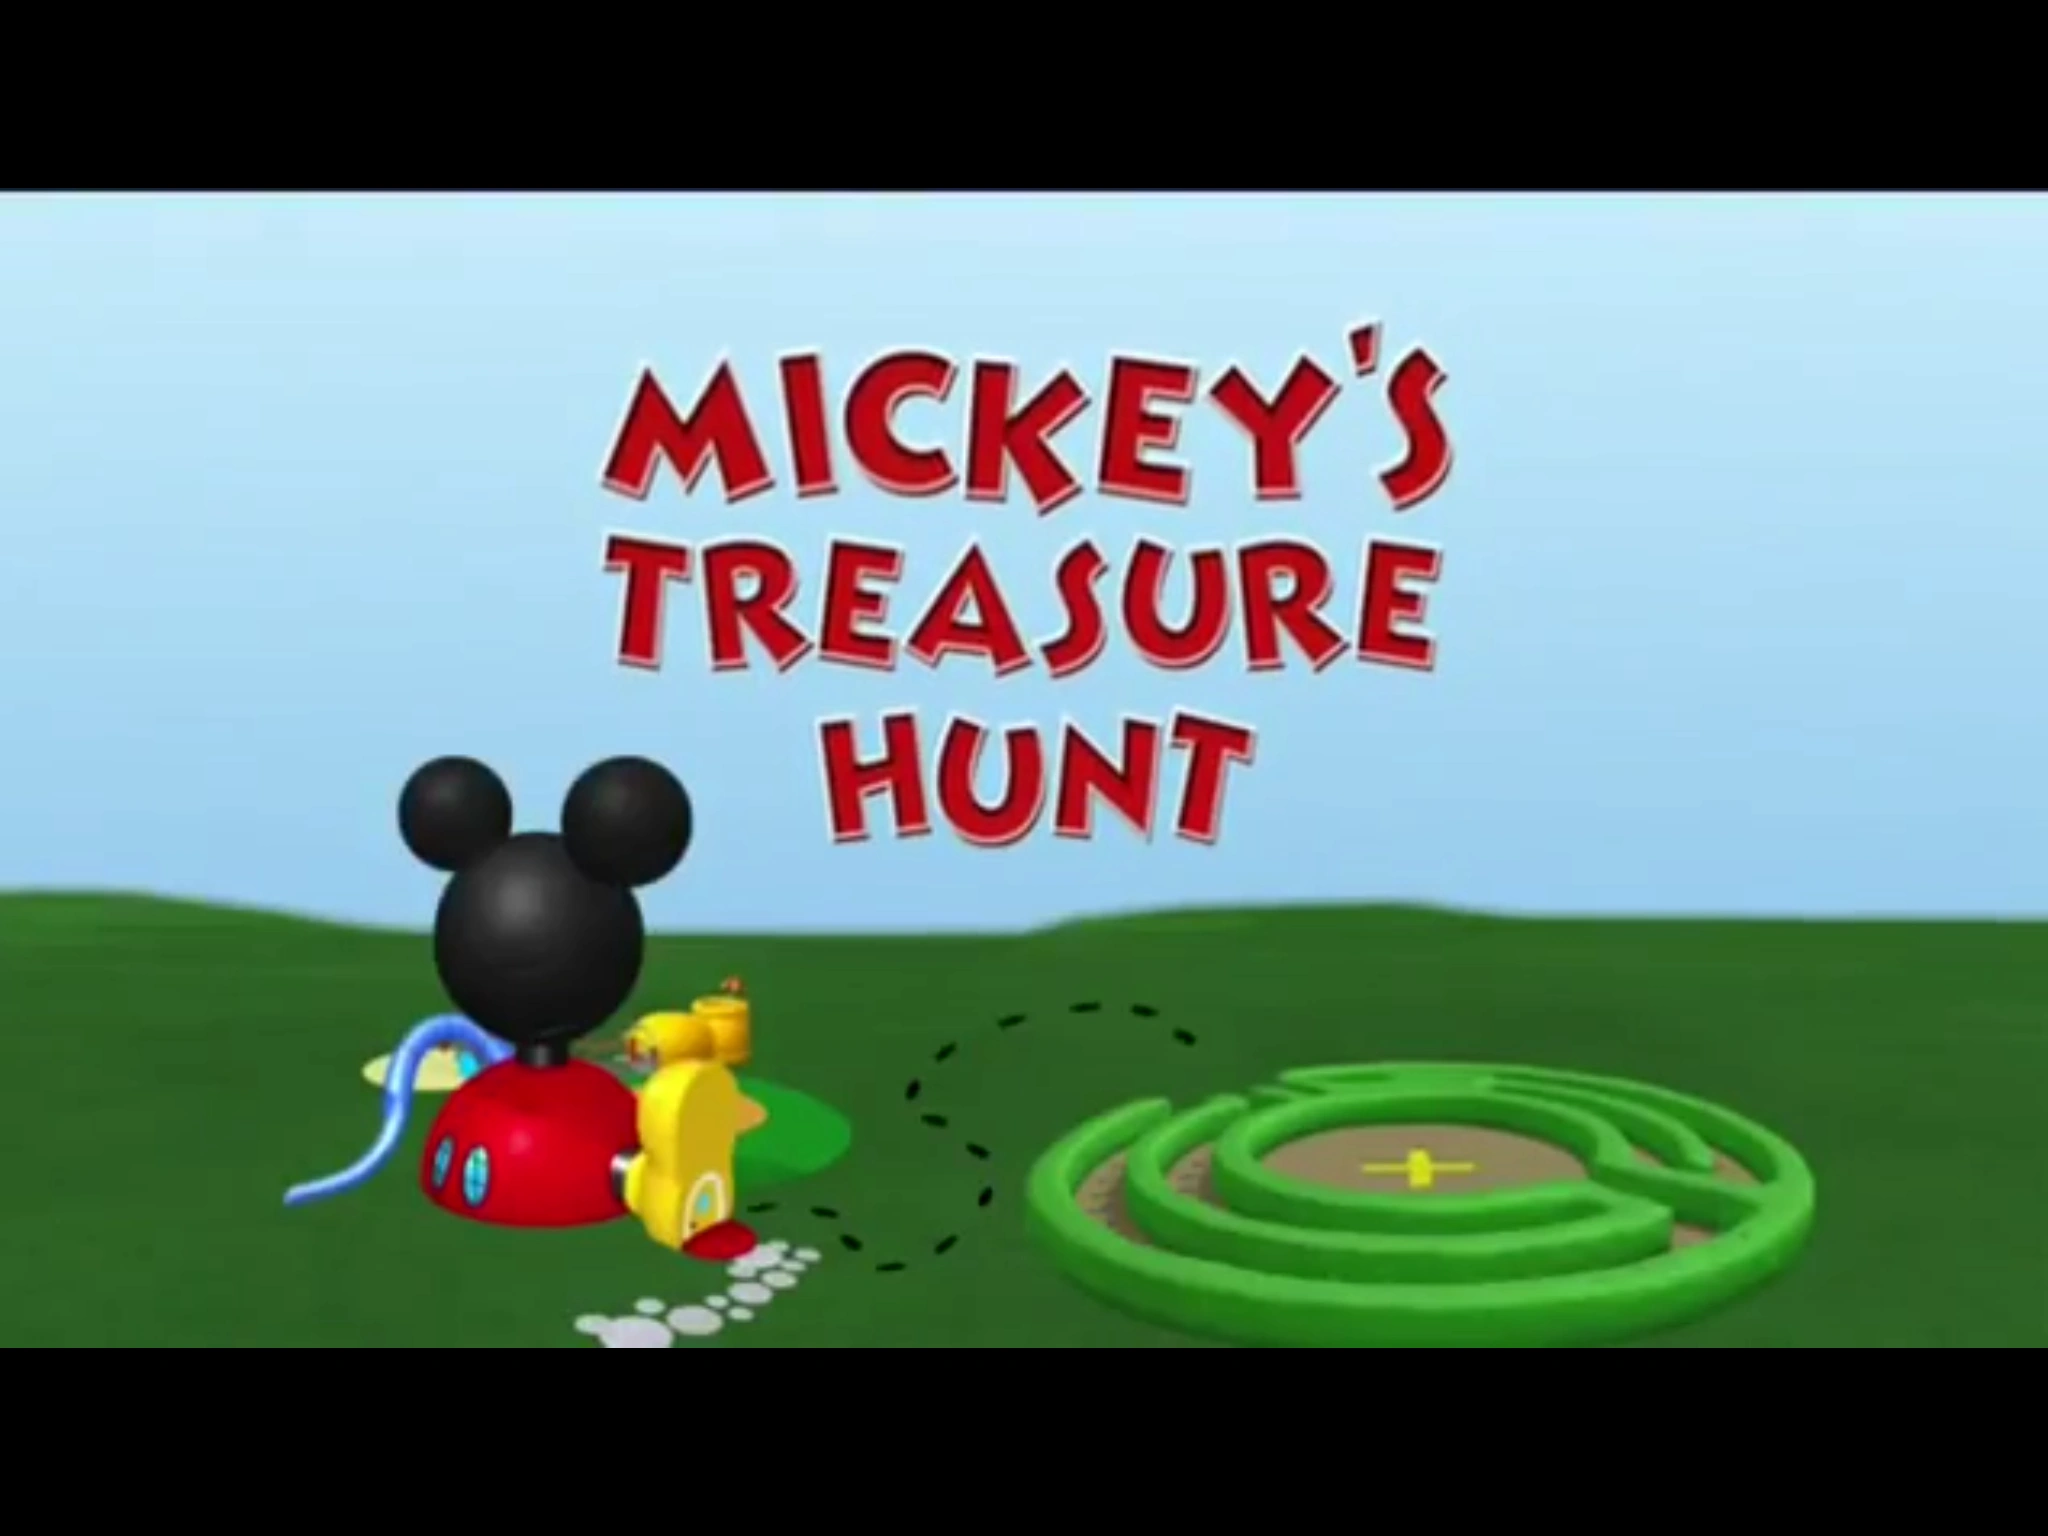 Pluto/Gallery, Mickey Mouse Clubhouse Episodes Wiki